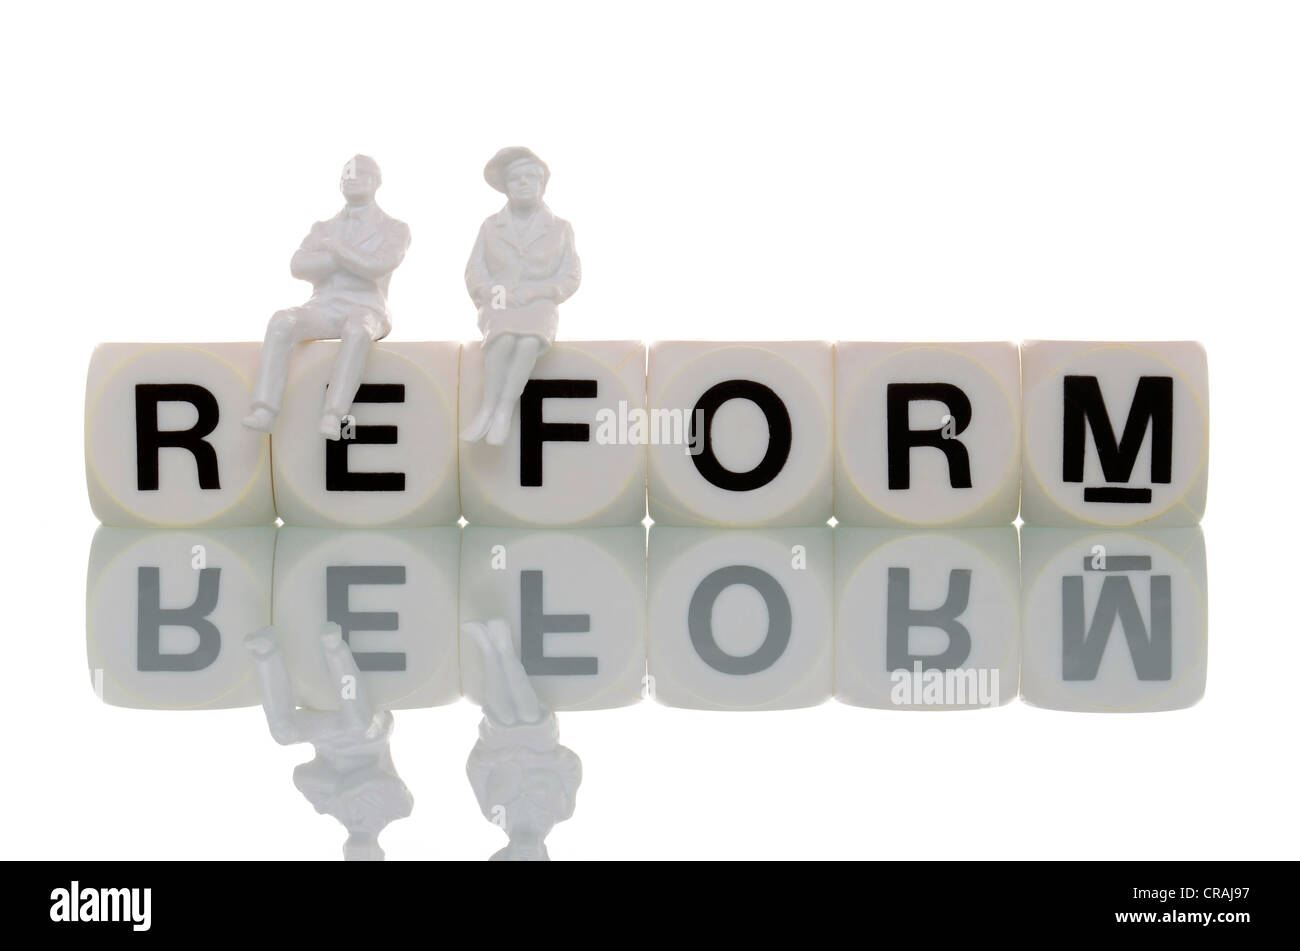 Two pensioner figurines sitting on the word reform, symbolic image for pension reform Stock Photo